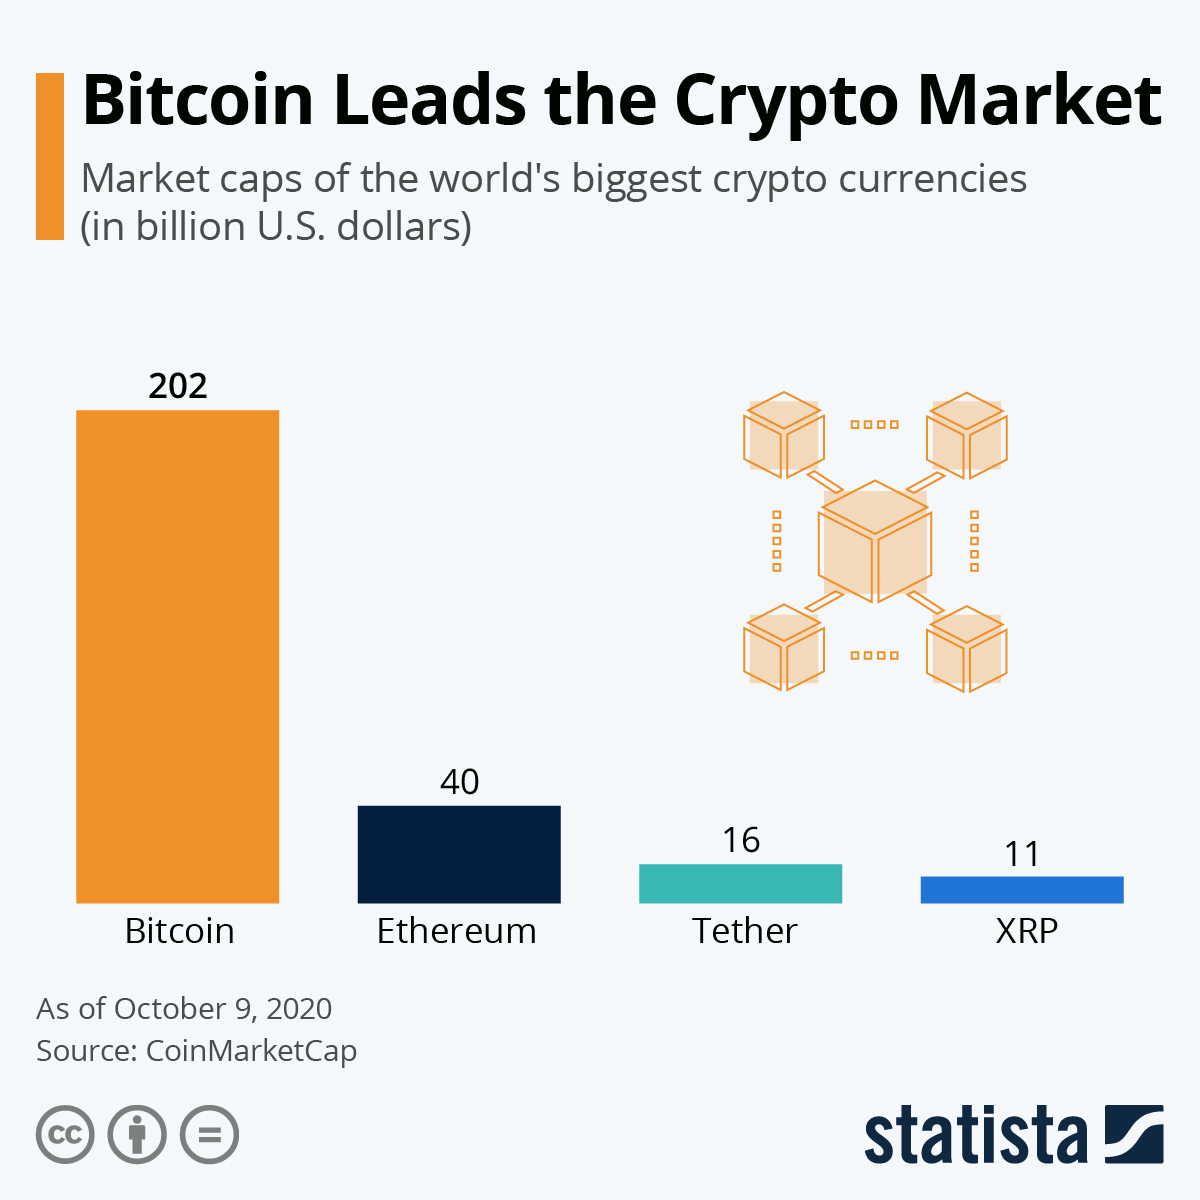 Bitcoin leads cryptocurrency market